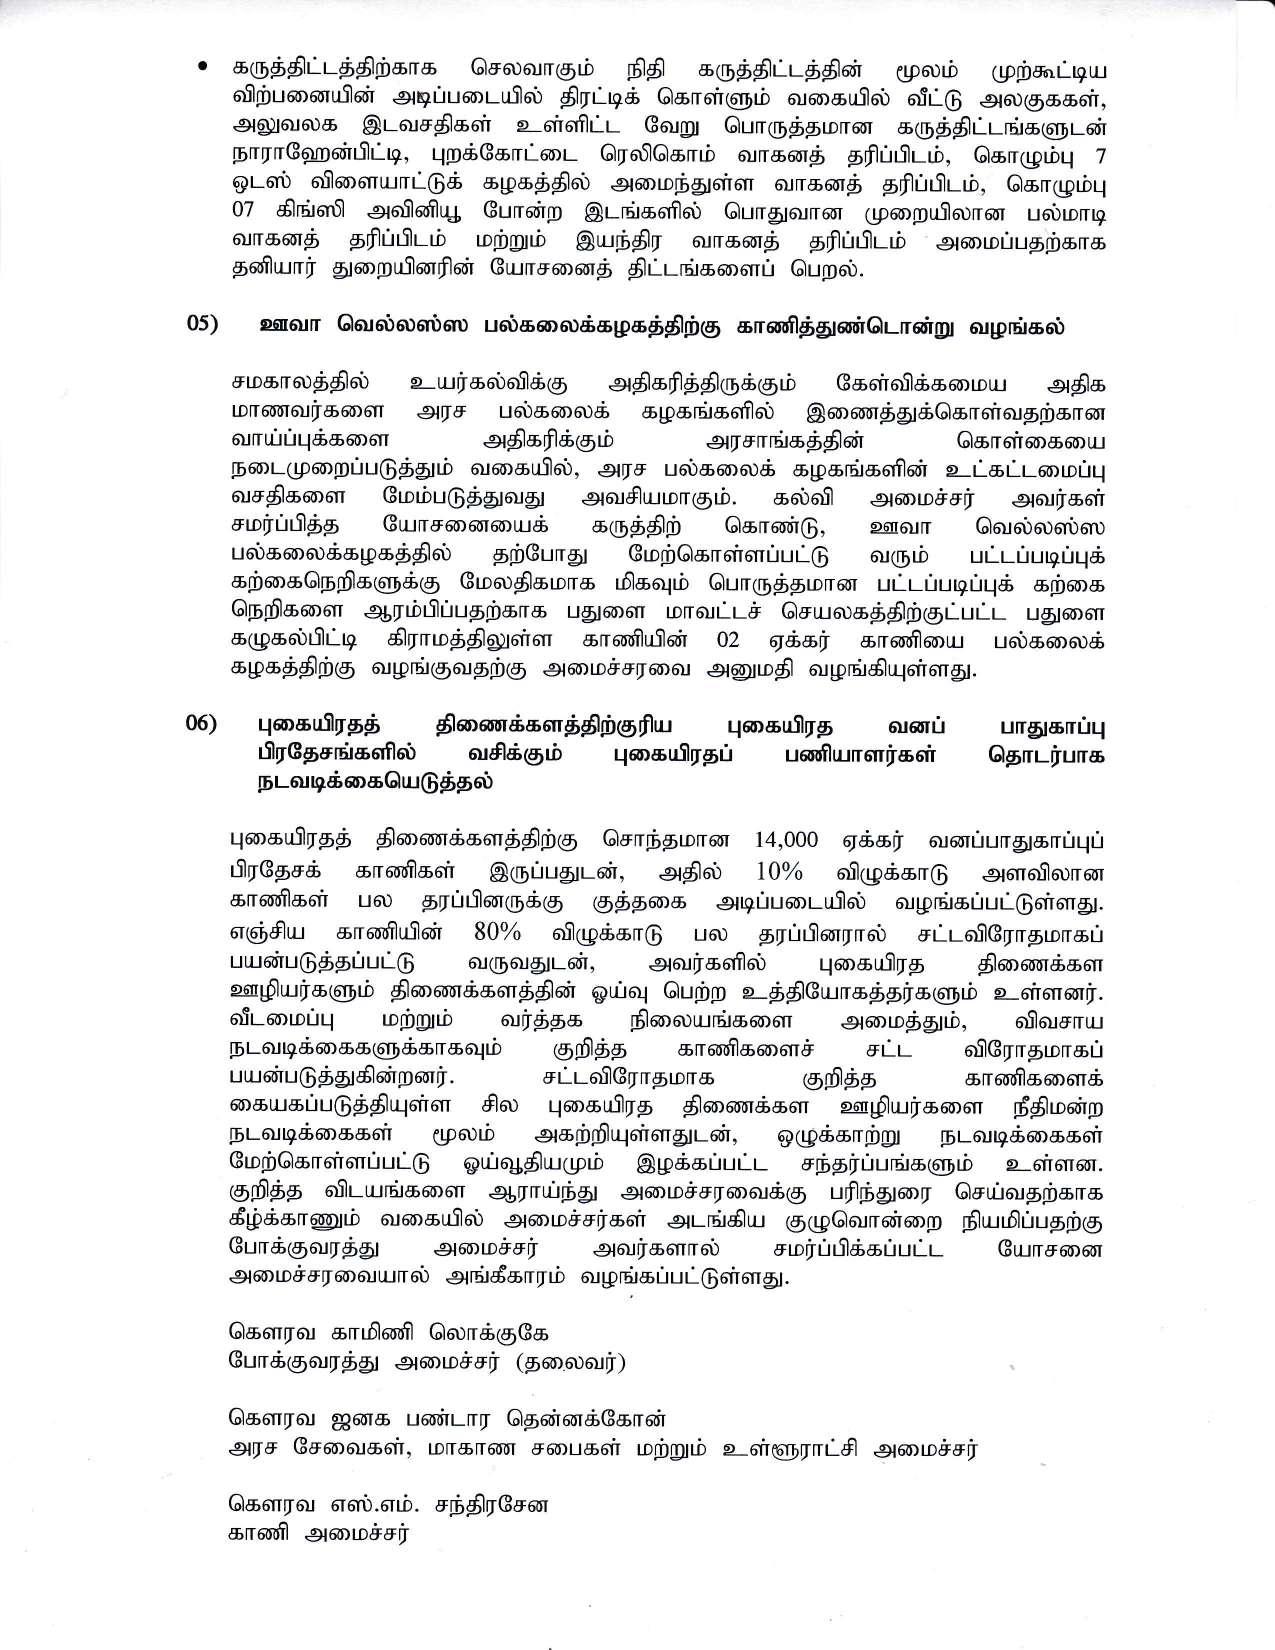 Cabinet Decision on 12.10.2020 Tamil compressed page 003